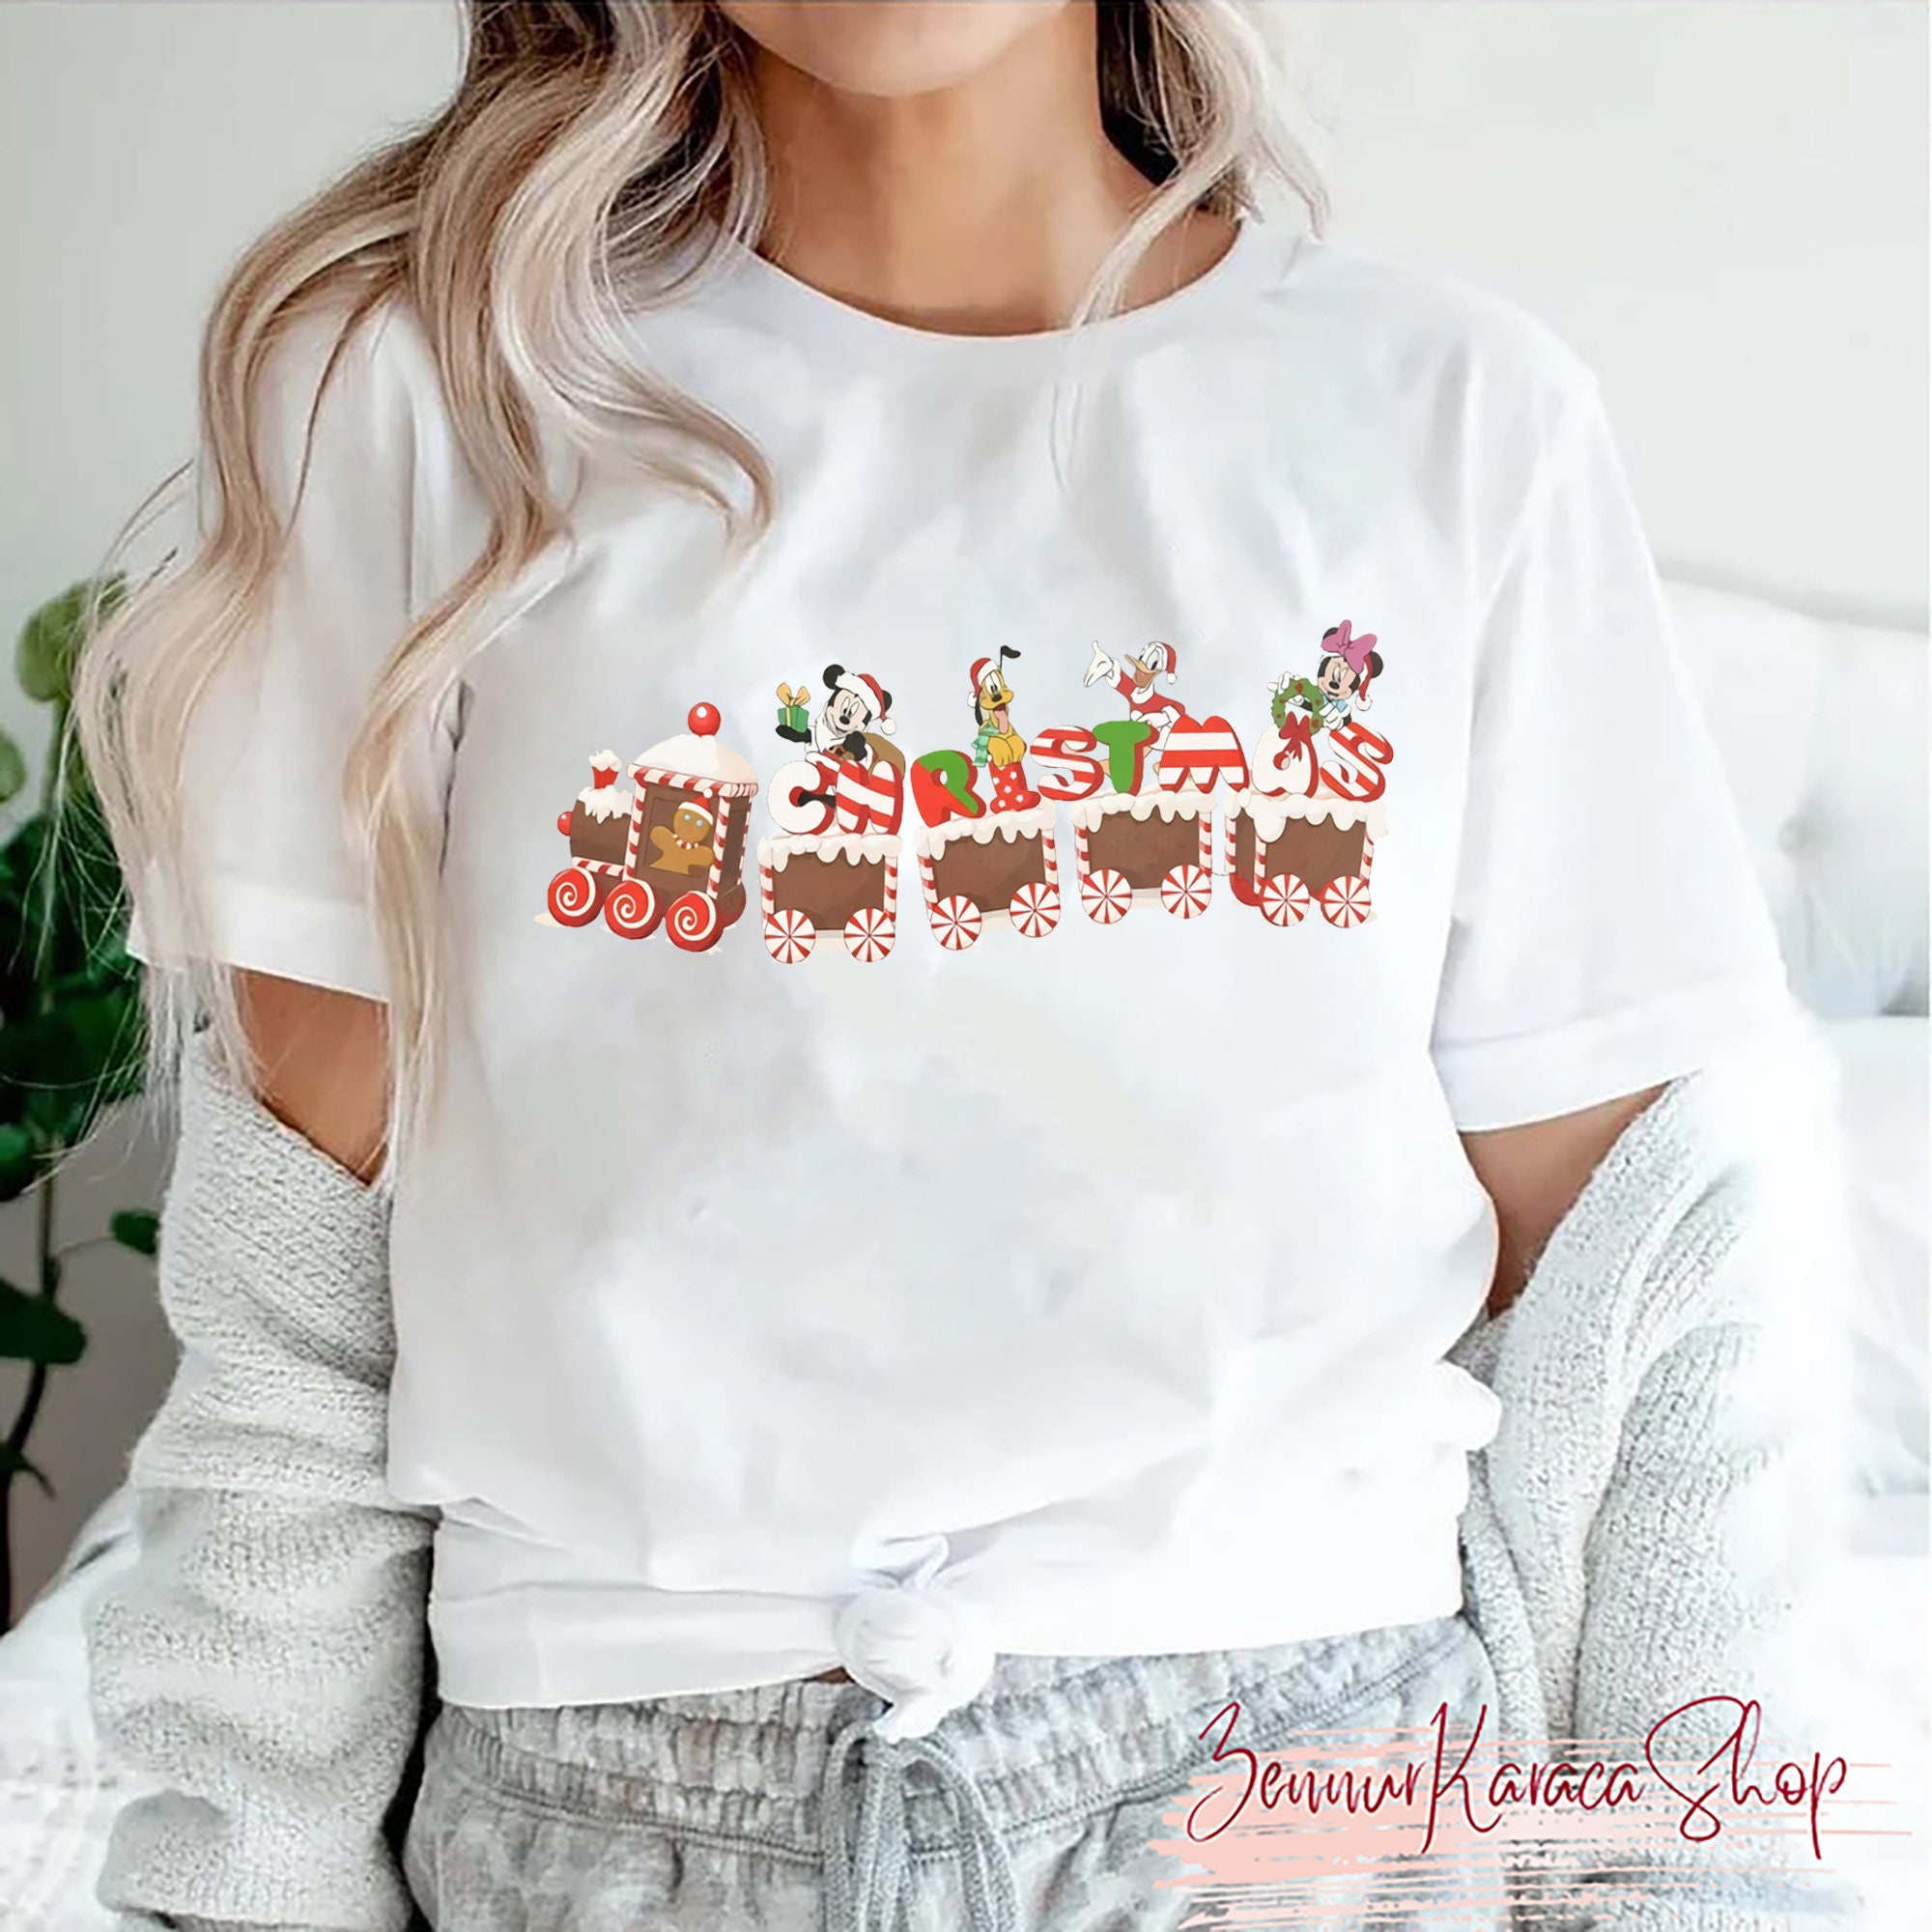 Discover Mickey and Friends Christmas Shirt, Disney Christmas Shirt, Mickey Christmas Shirt, Disneyland Xmas shirt, Disney Christmas Family Shirt